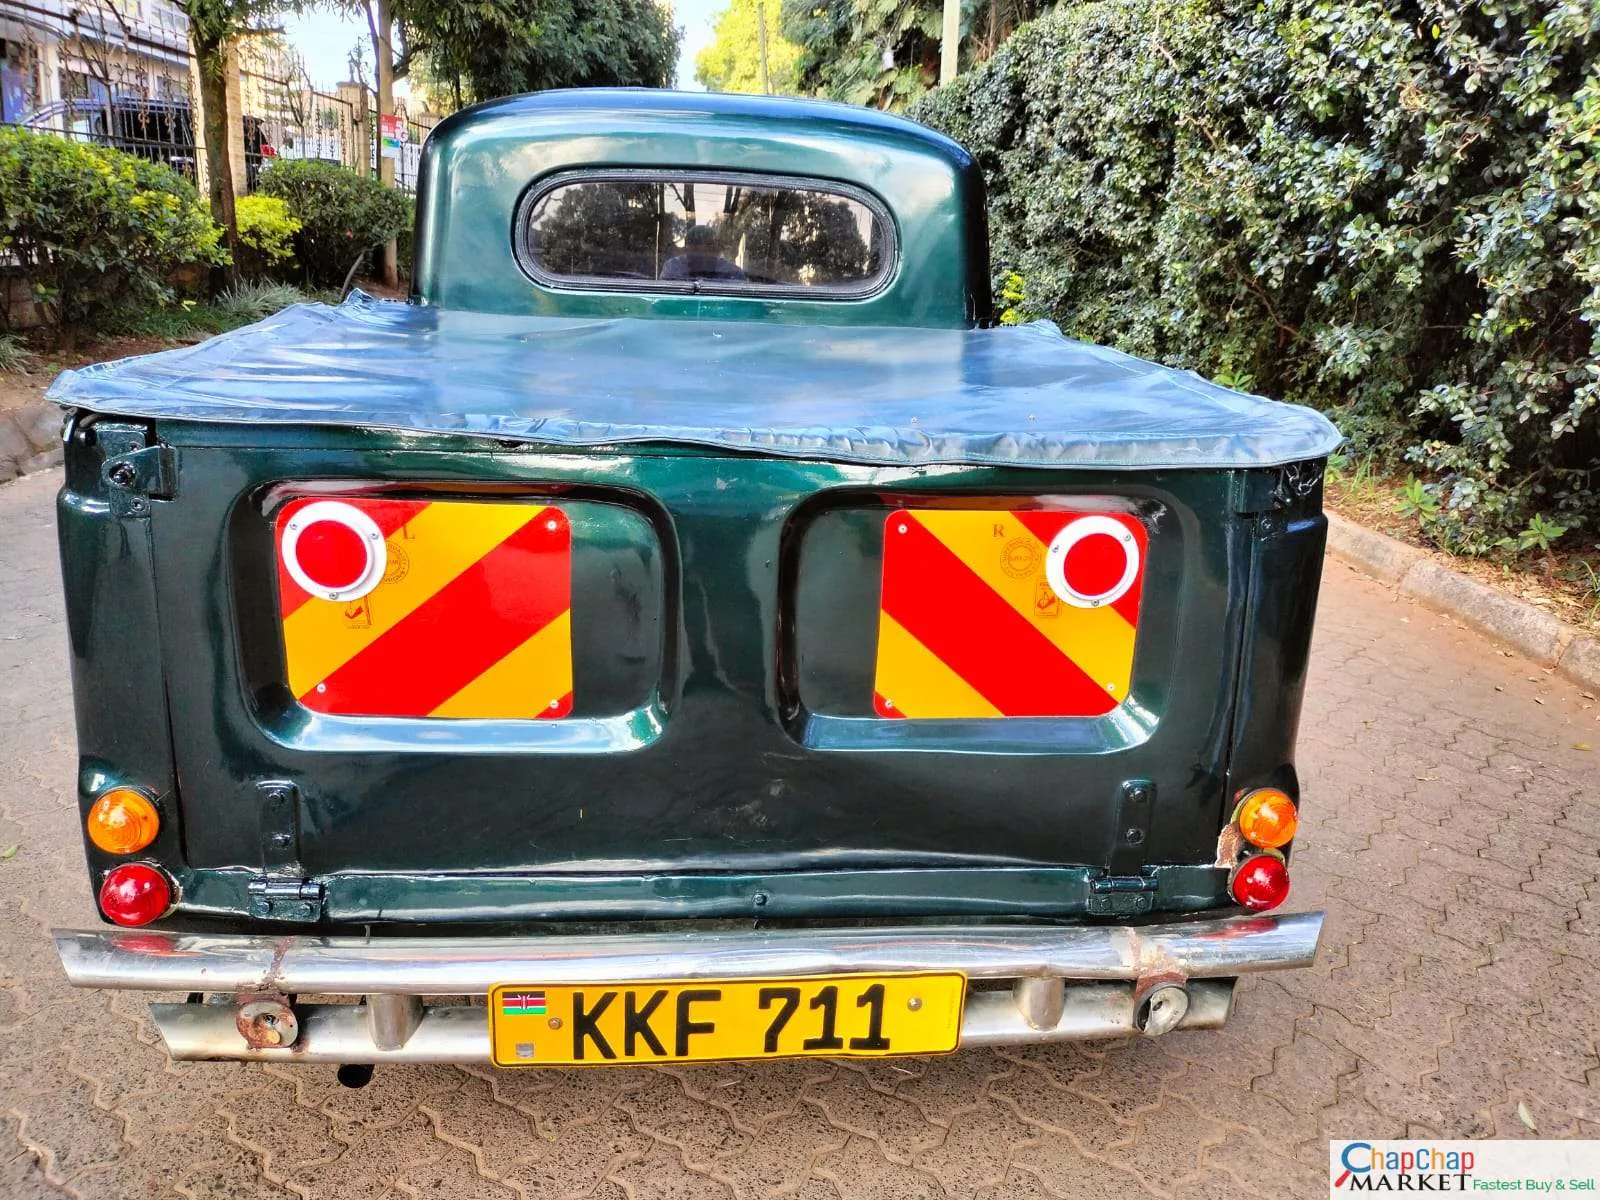 Perfect Condition vintage Classic car Morris Minor for sale Quick sale in Kenya Nairobi